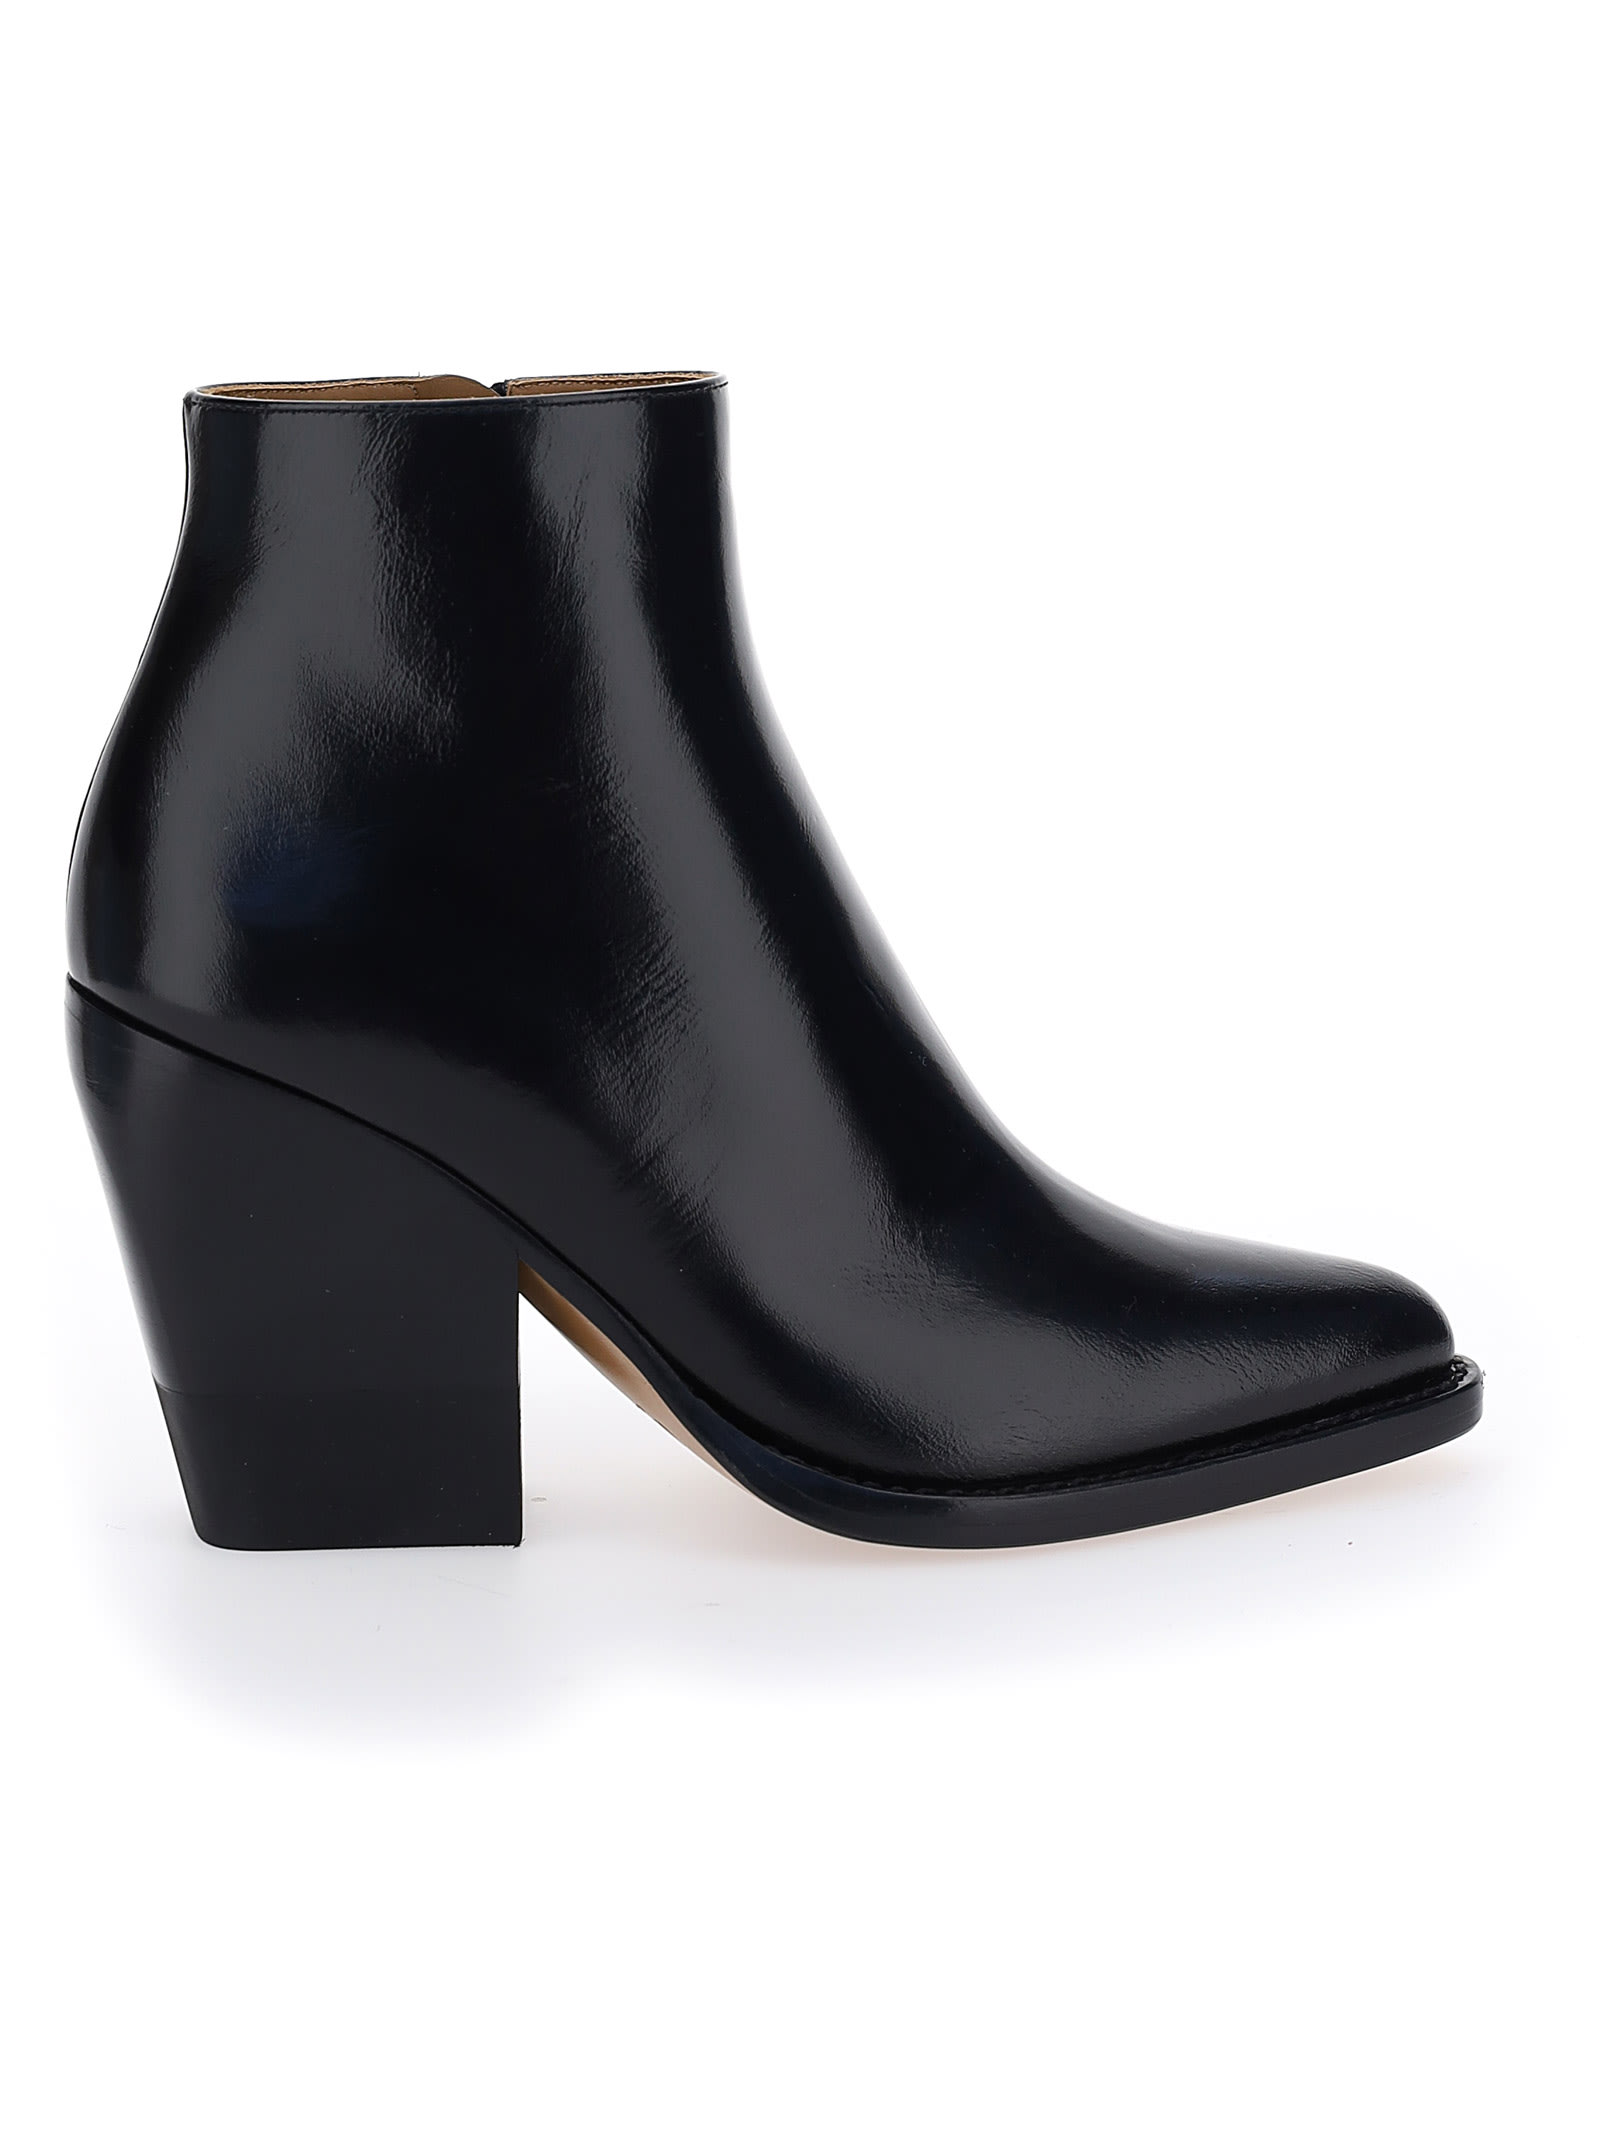 CHLOÉ RYLEE ANKLE BOOTS